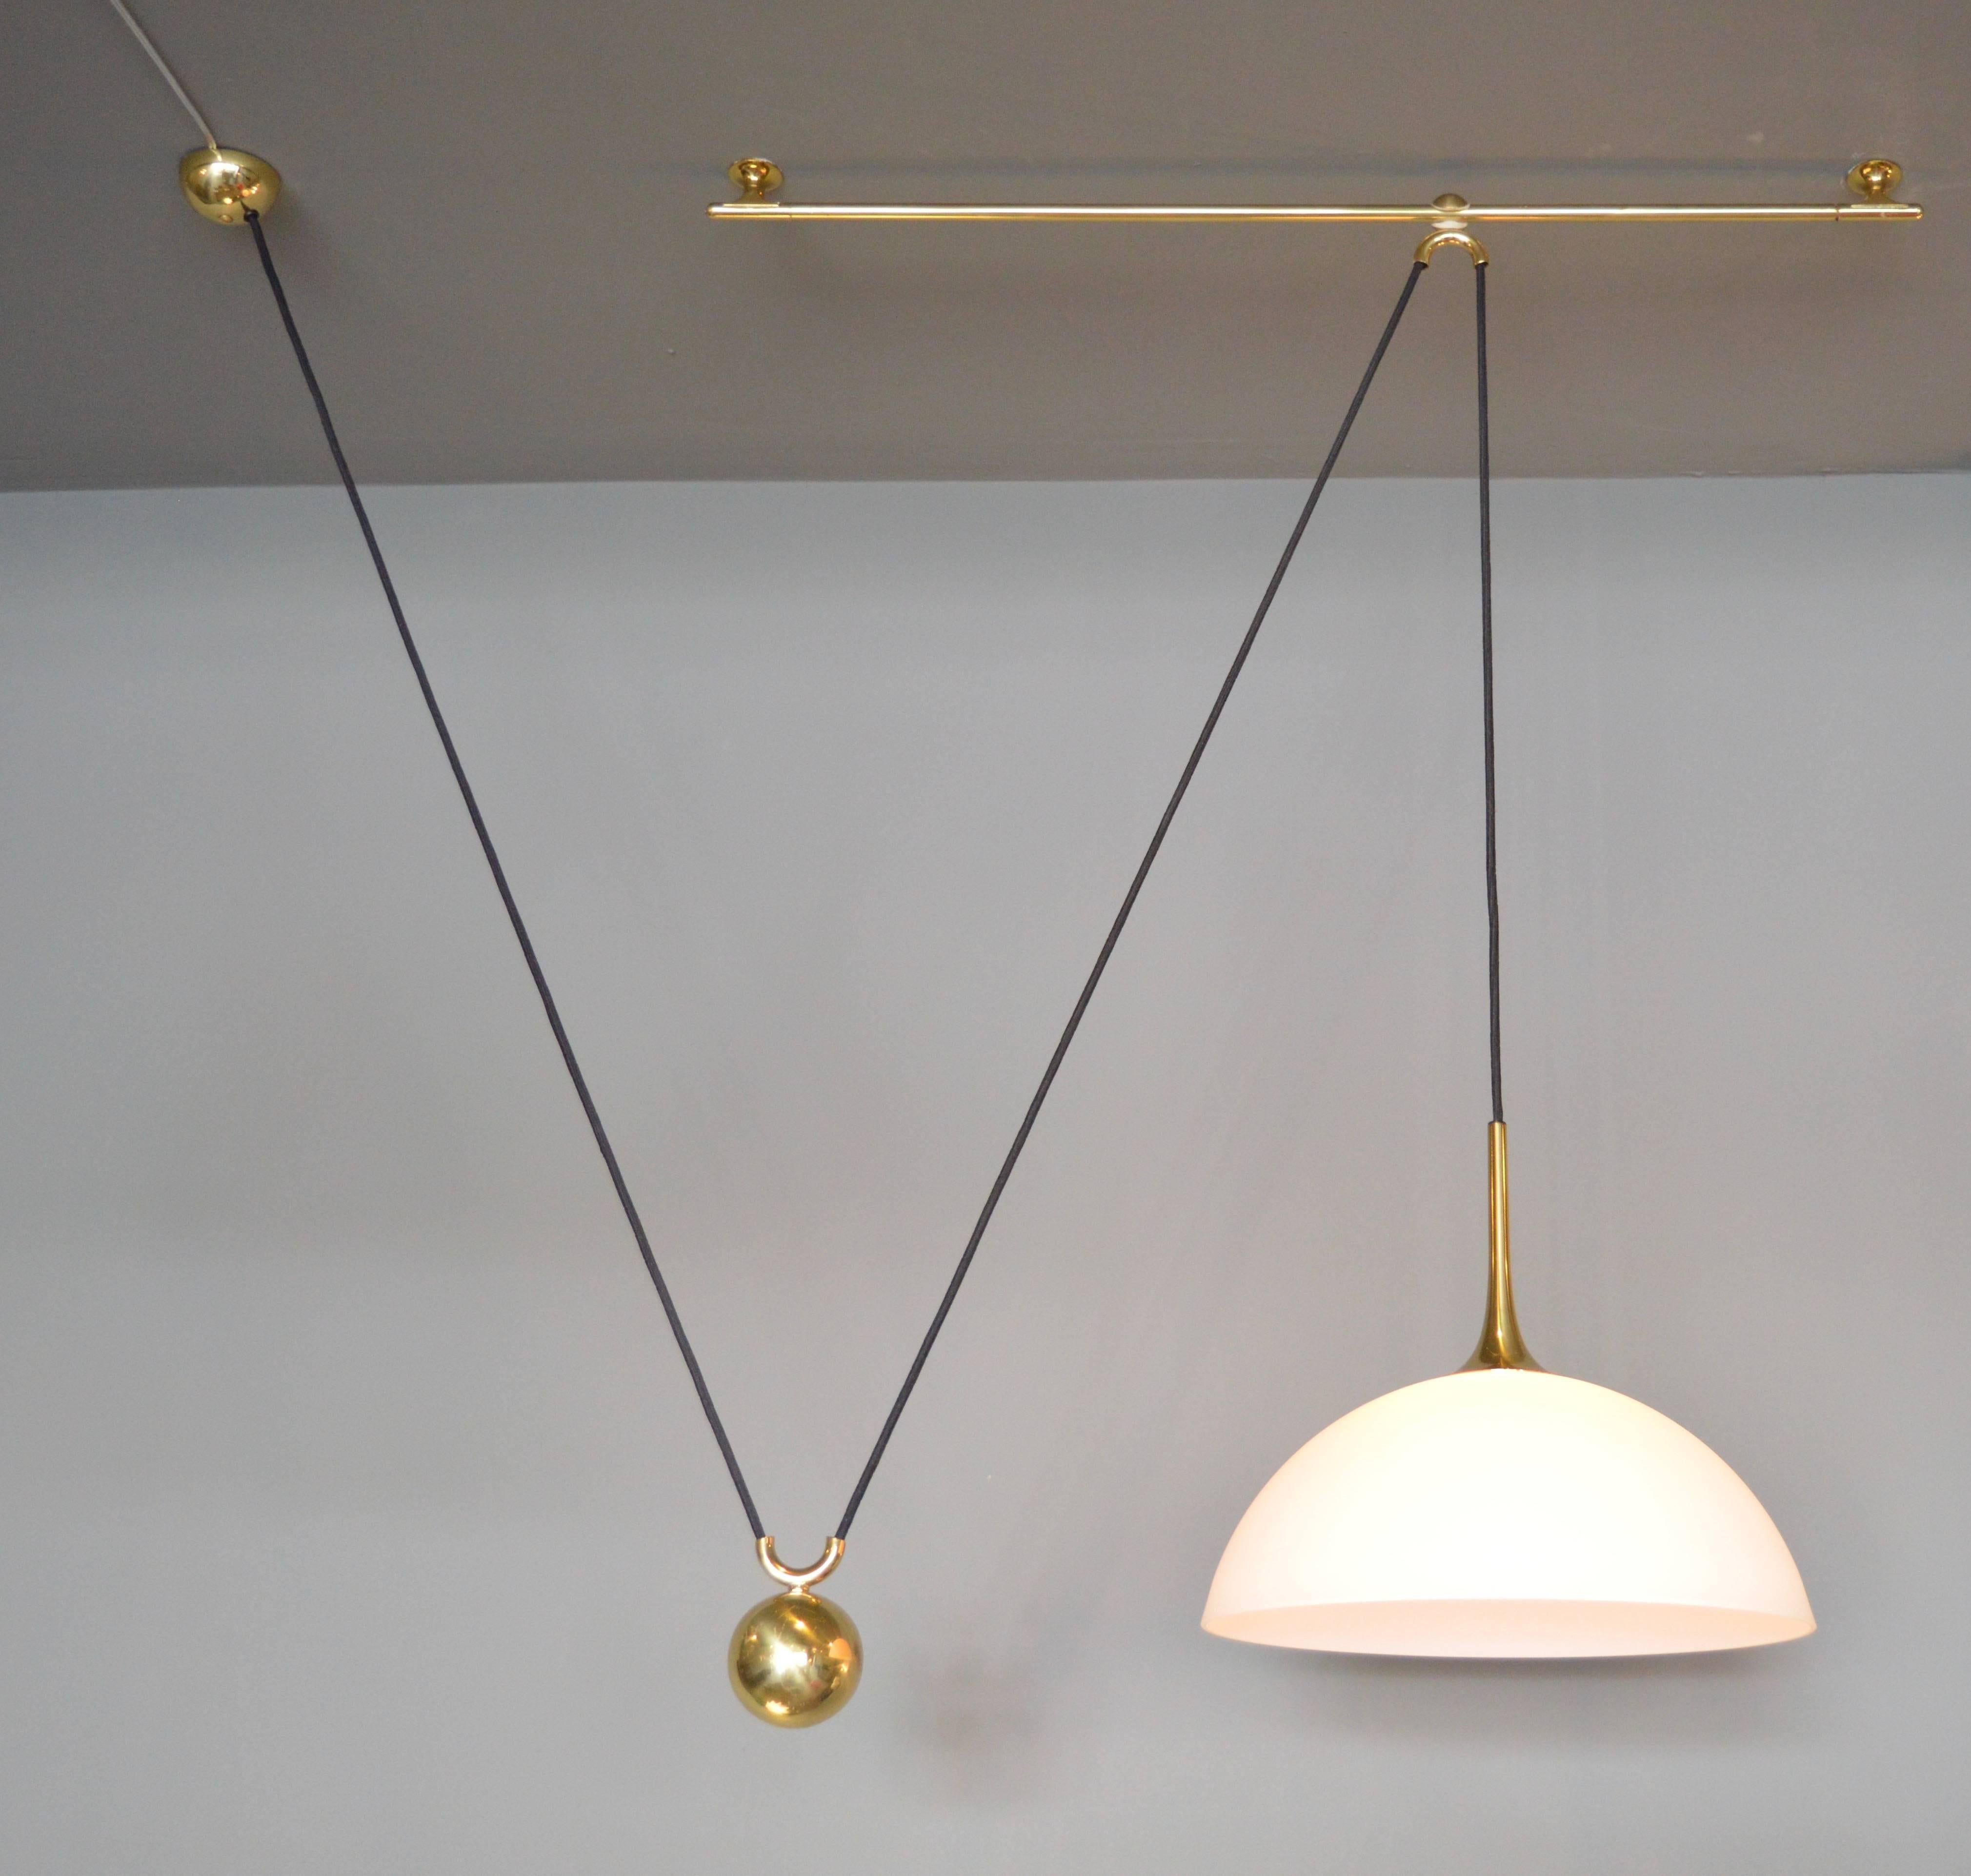 Unique counter balance pendant by Florian Schulz. Pendant features an opaque glass shade with brass stem, canopy, counter weight and brass rod. Pendant can be pulled up or down easily on the cloth cord and can also slide forward and backward on the